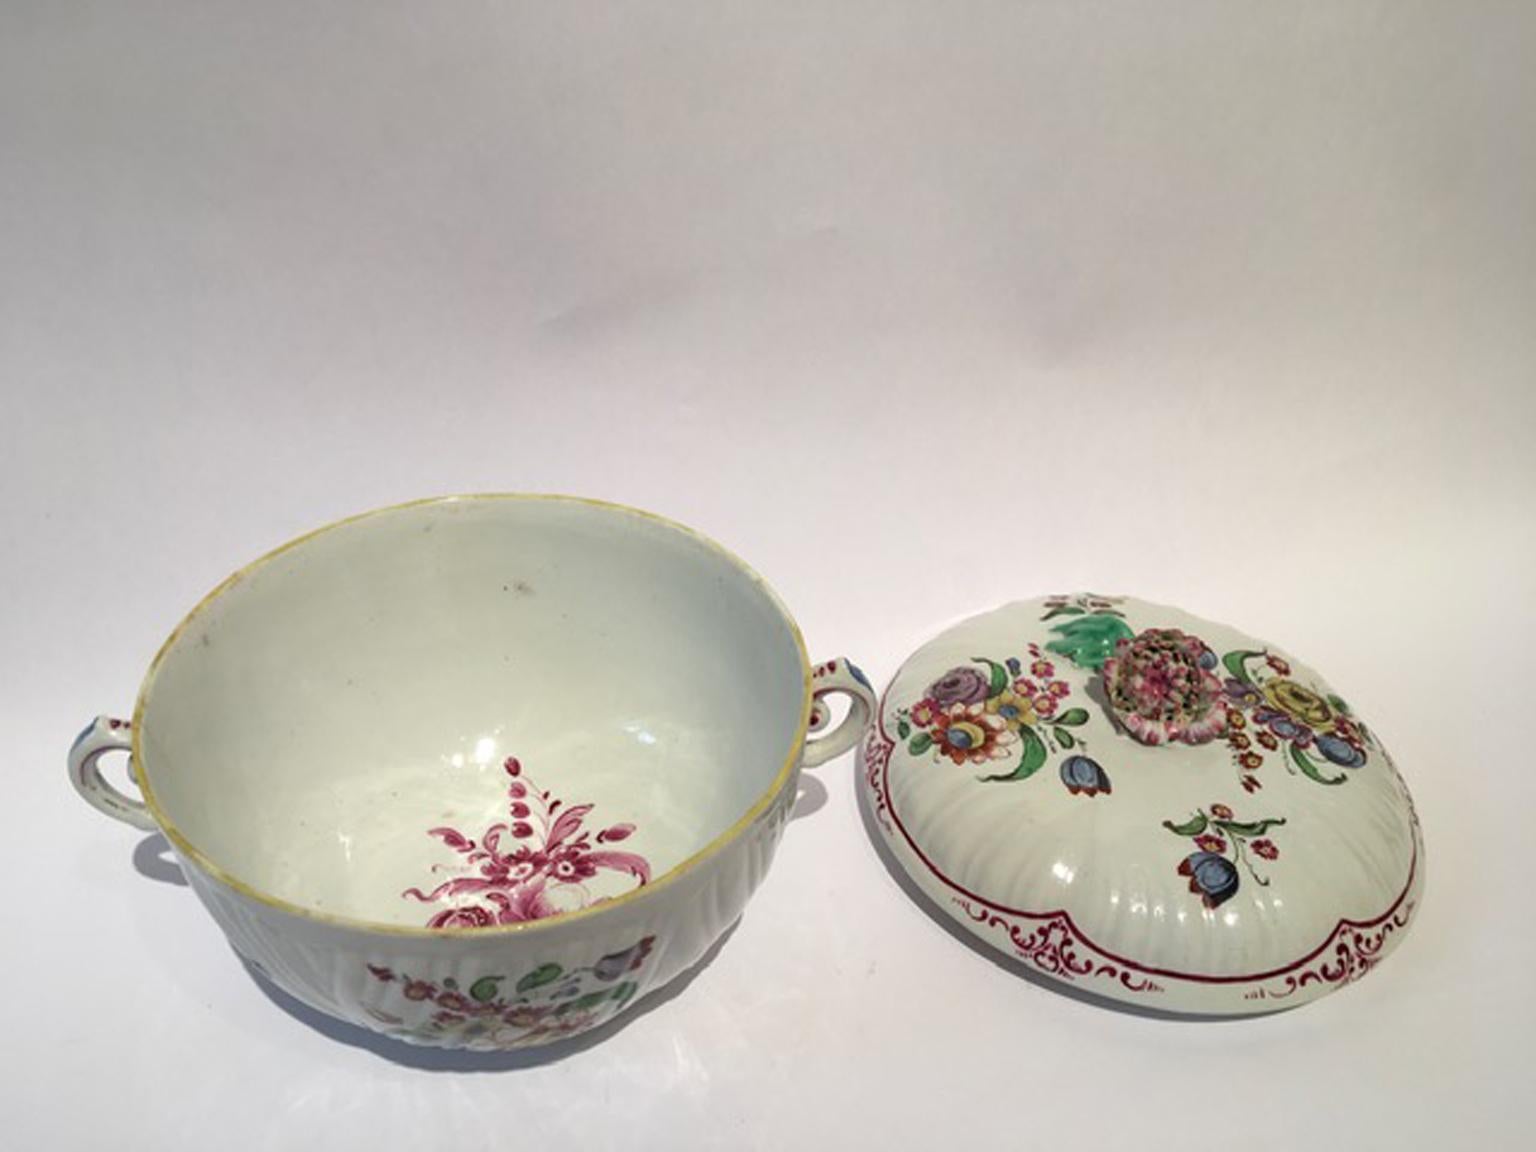 Italy 18th Century Richard Ginori Porcelain Covered Cup with Floral Drawings For Sale 5